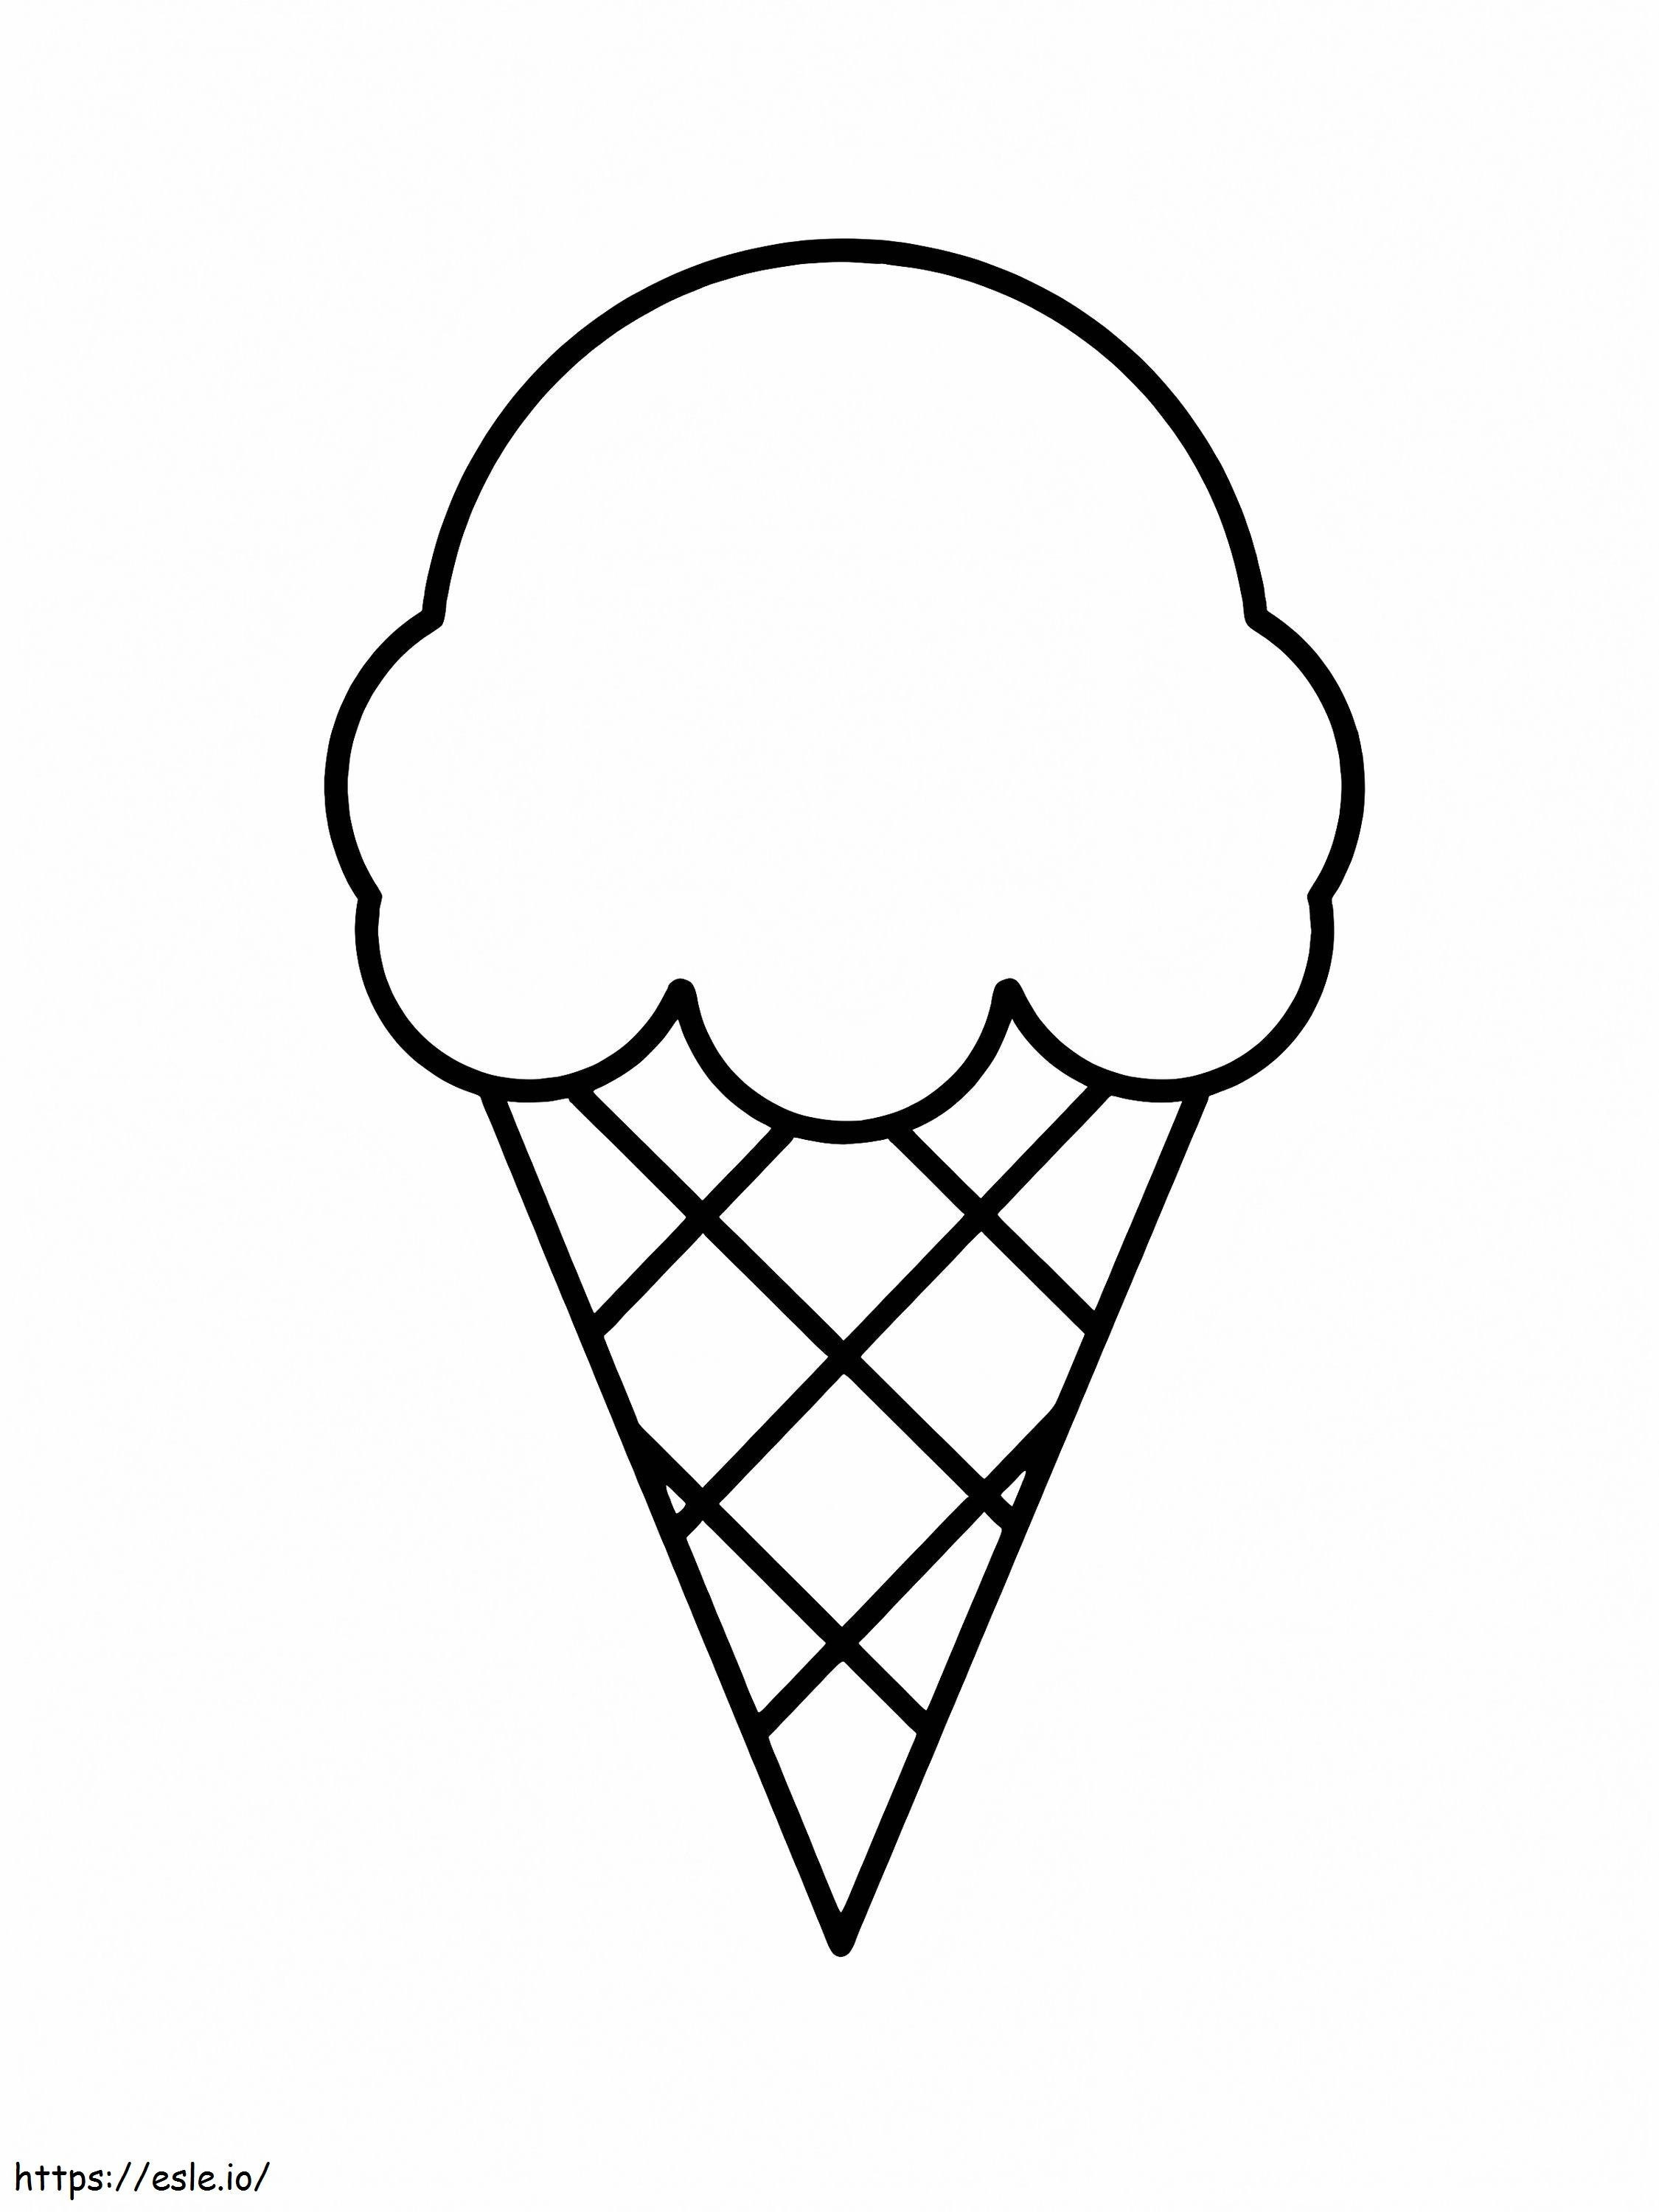 Easy Ice Cream coloring page